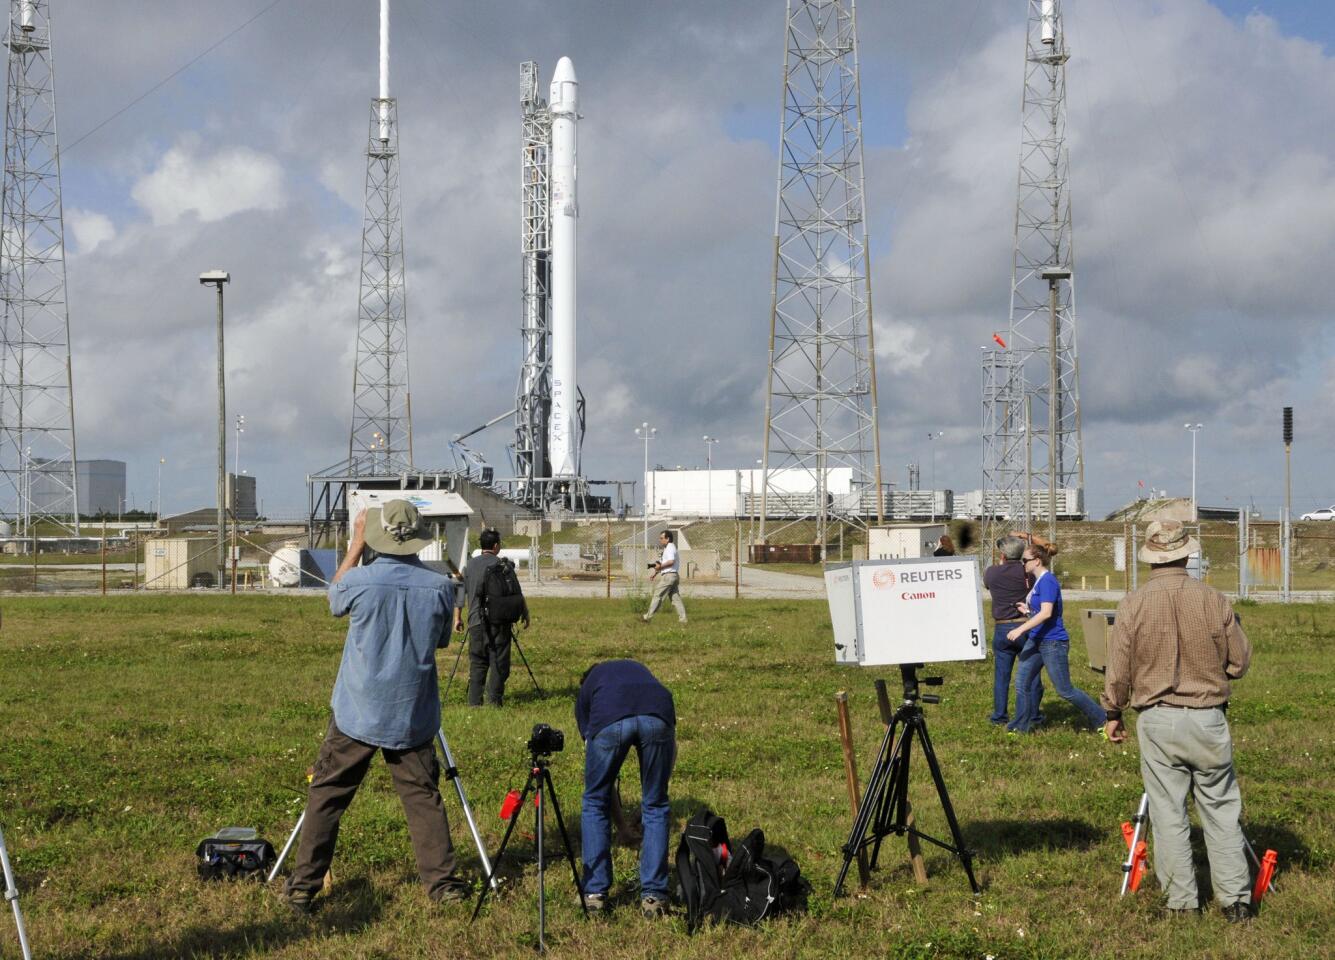 Photographers focus on SpaceX's Falcon 9 booster and unmanned Dragon cargo ship the day before the launch.